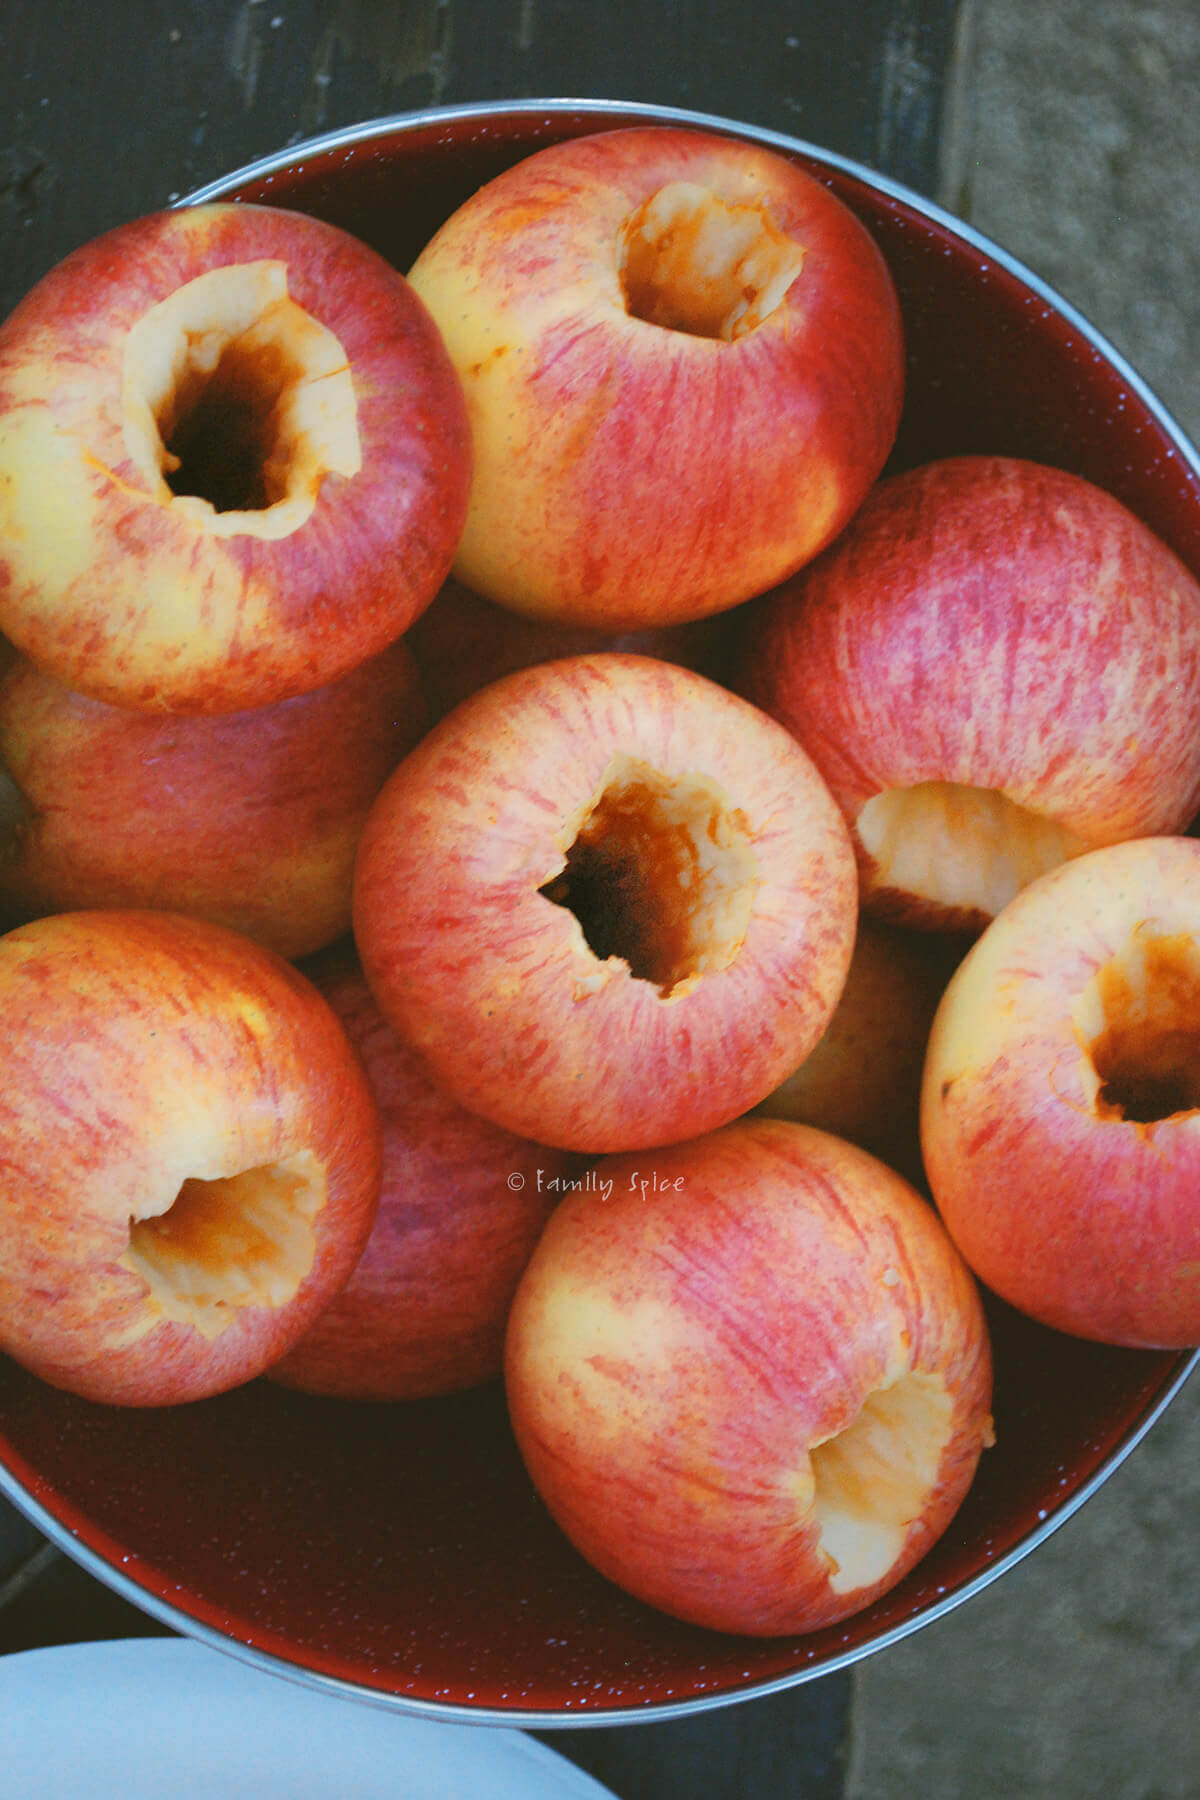 A bowl of cored red apples